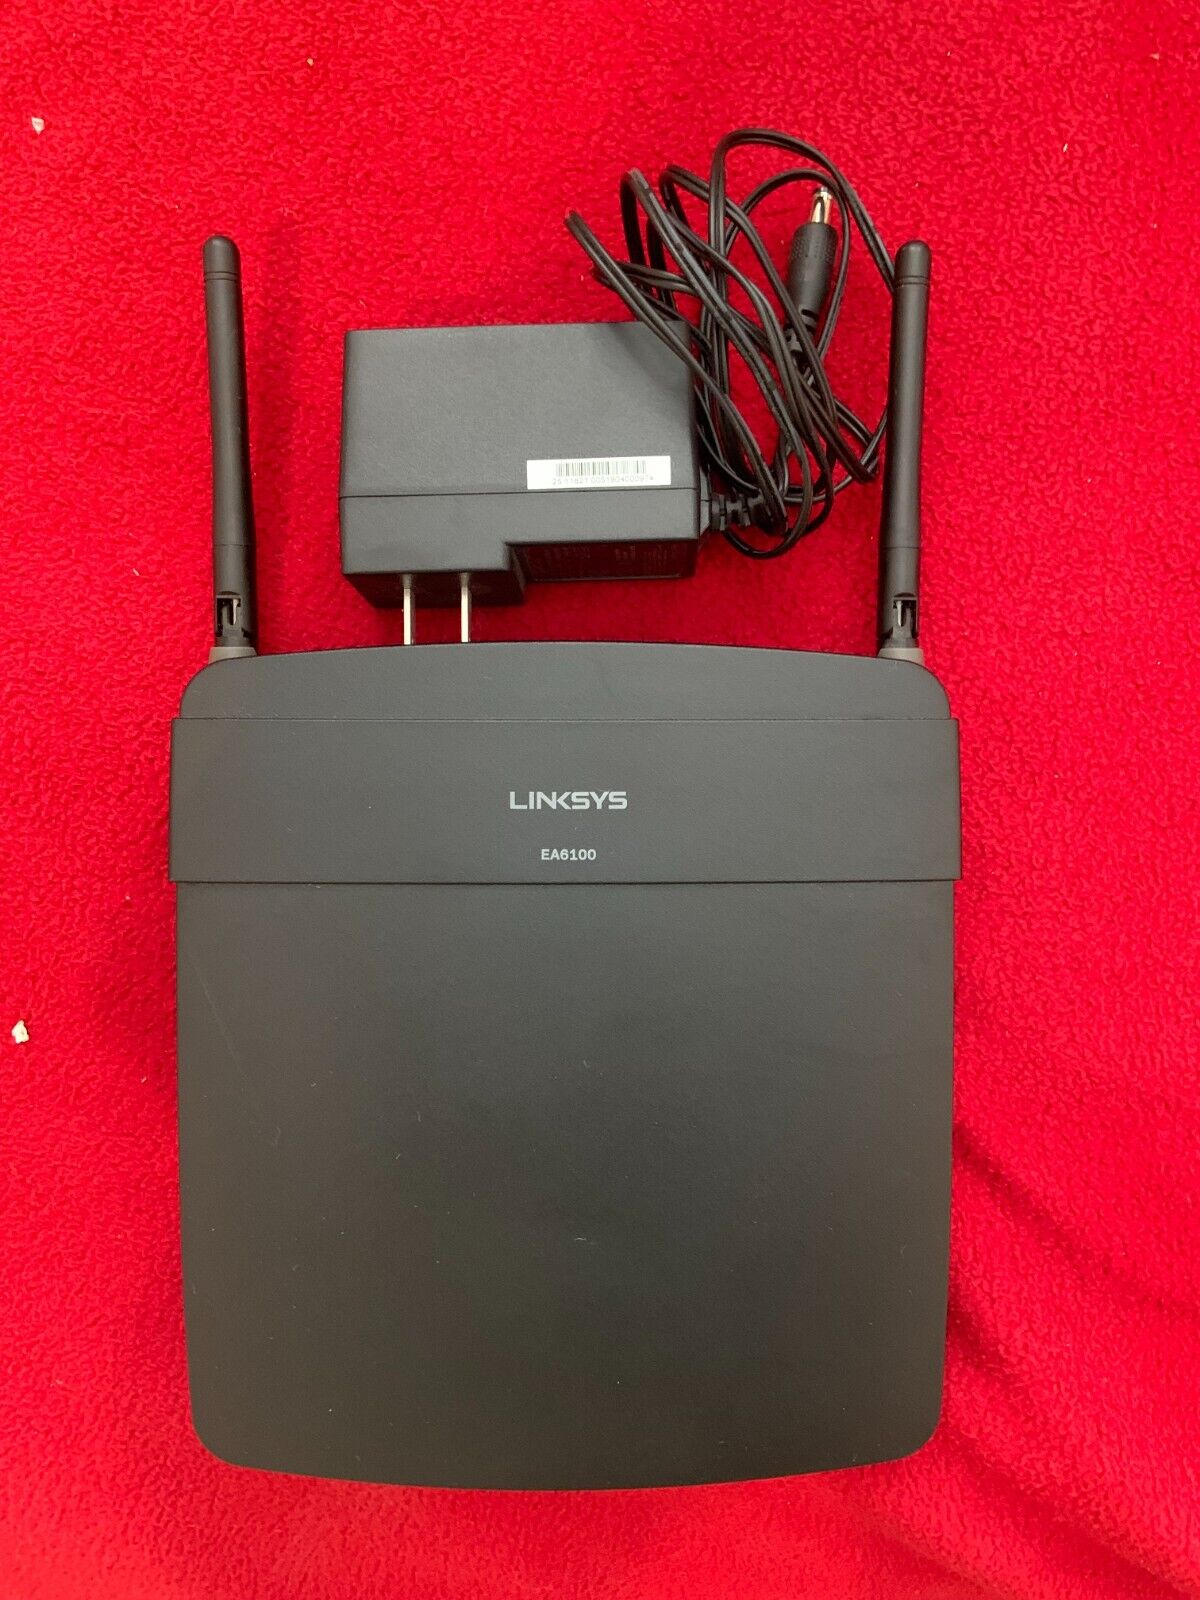 Linksys EA6100 Dual Band Smart Wi-Fi Router w/ Power Cord ~ 4 Lan Ports - Used